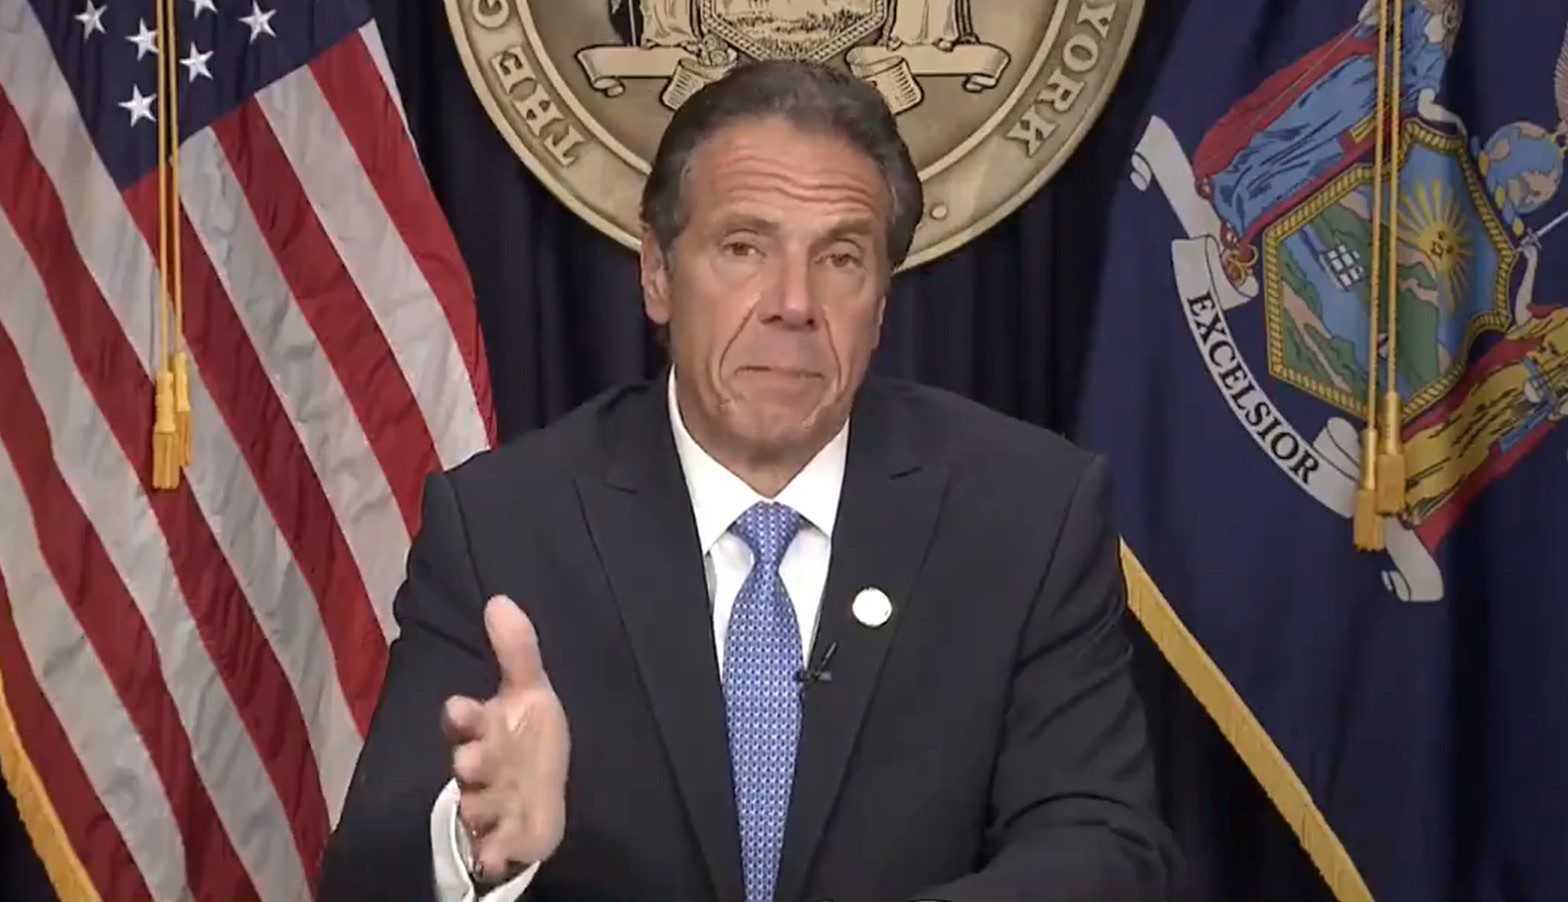 WATCH: Former NY Governor To Be Hauled In Front Of Congressional Covid Committee